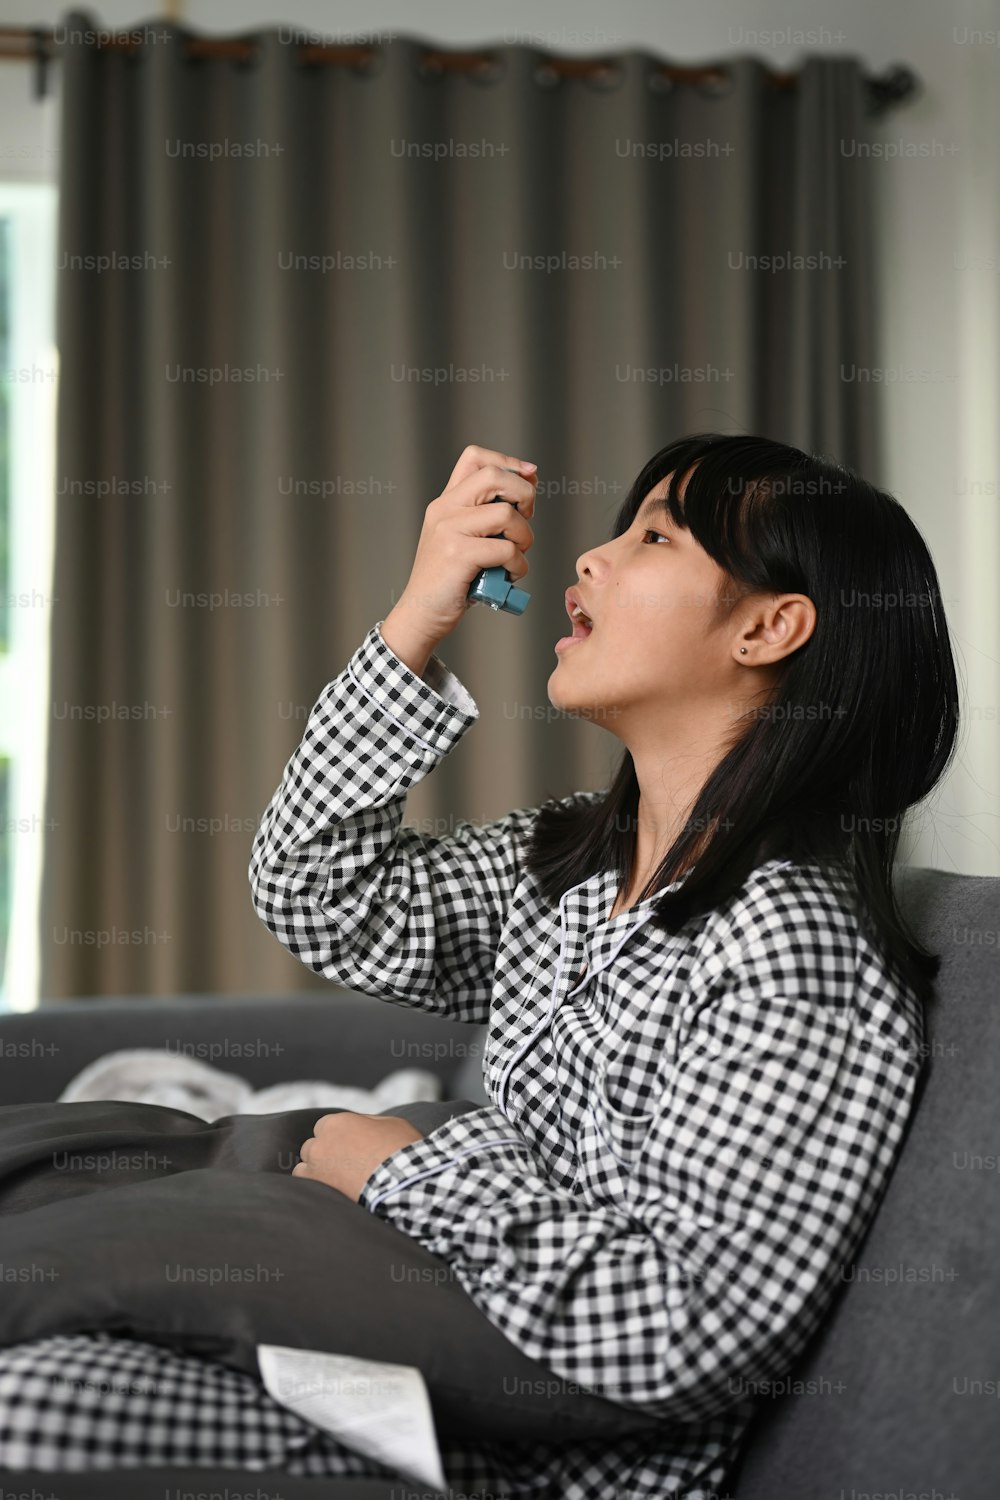 Image young girl using inhaler by herself for asthma while sitting on sofa at home.